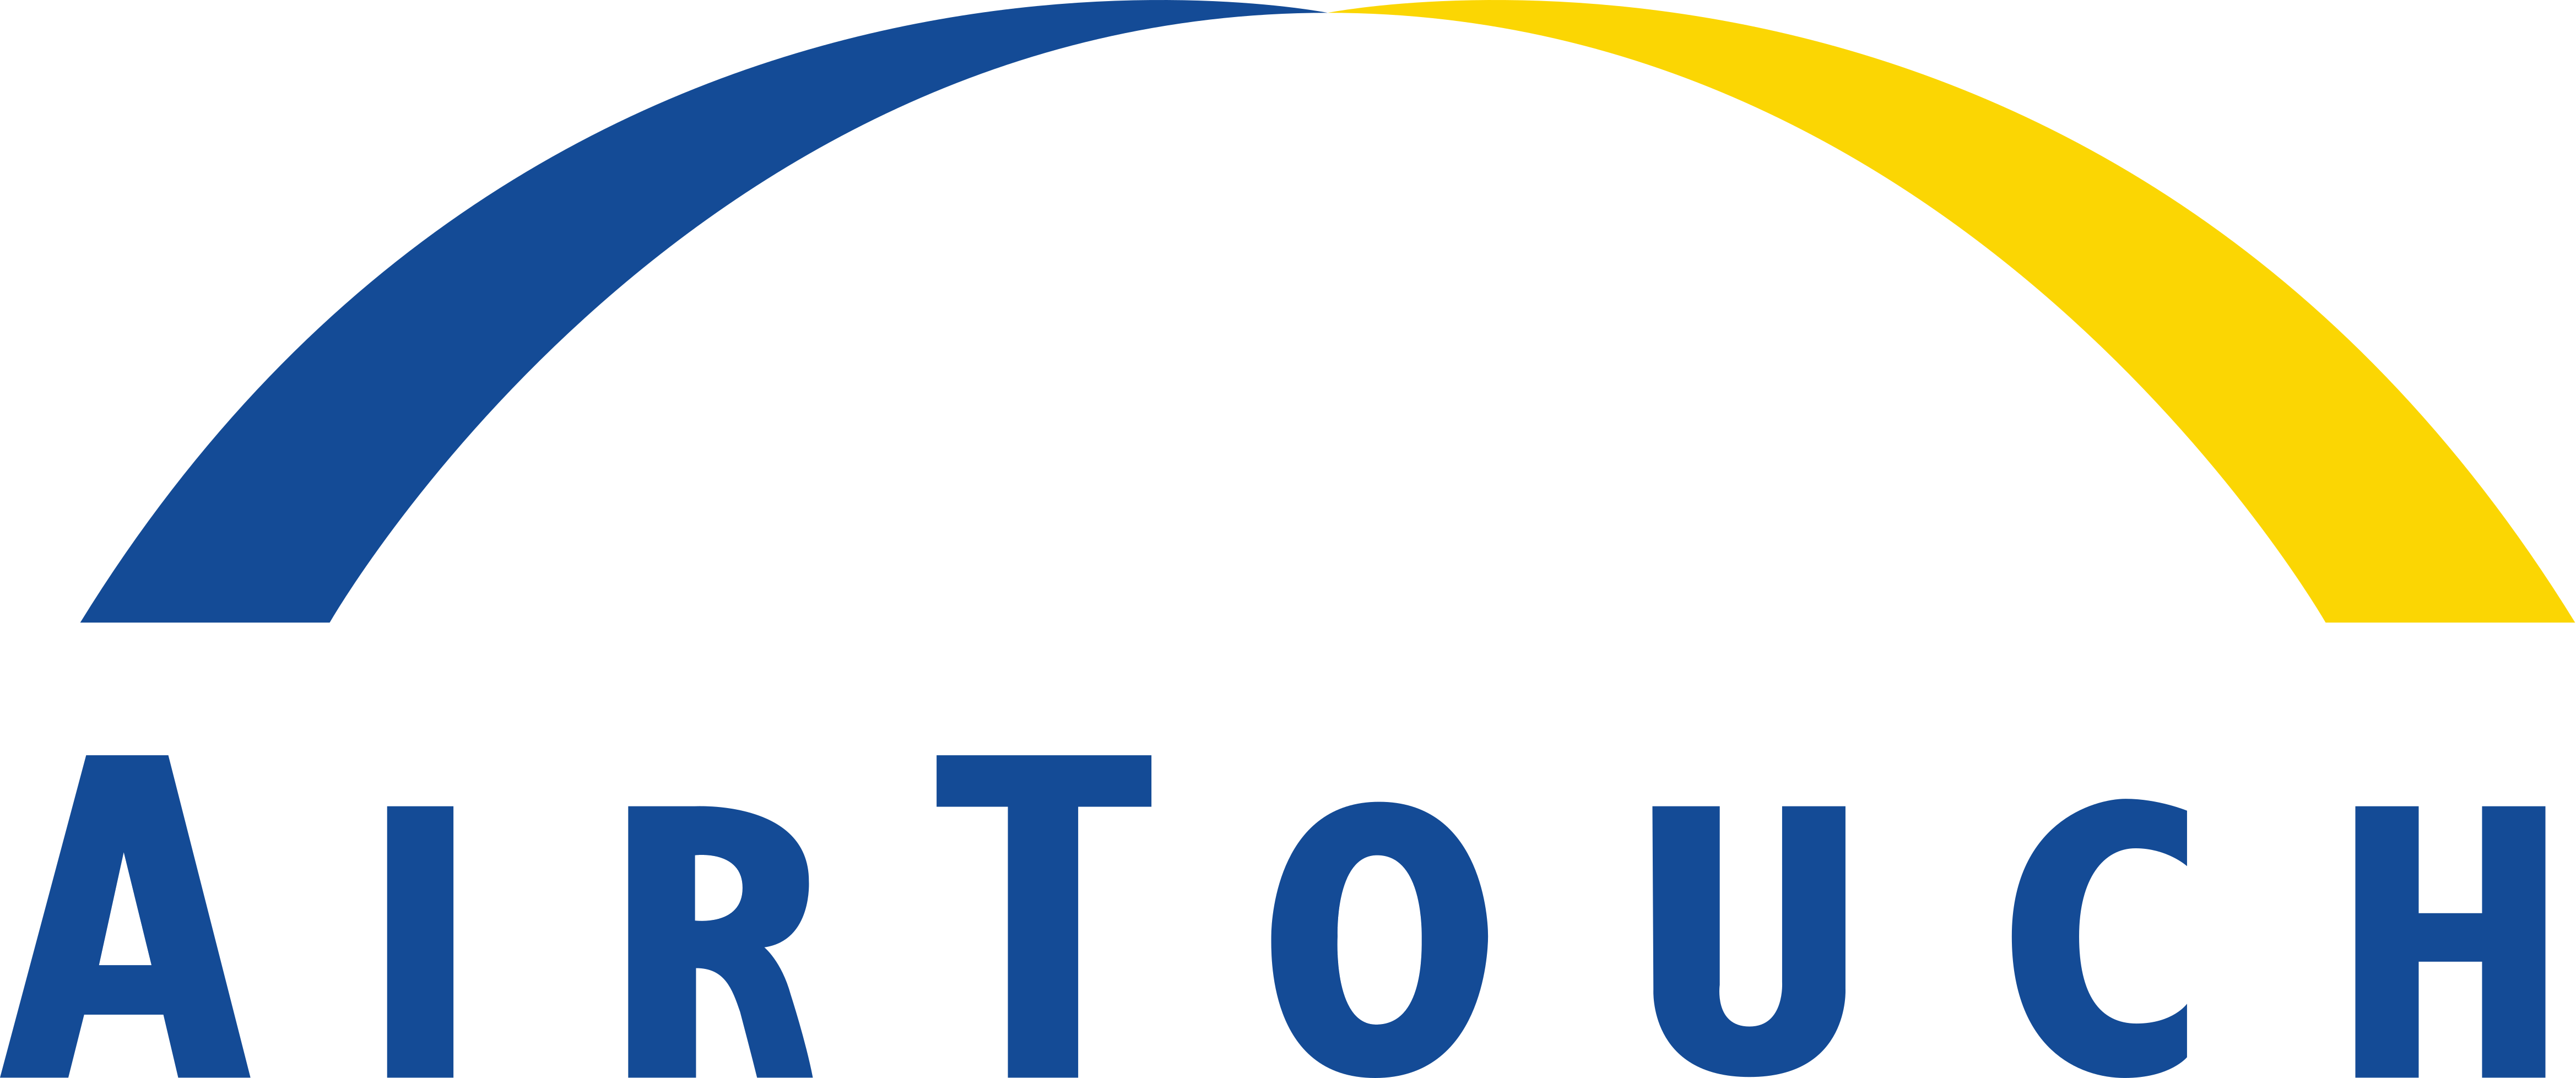 airtouch communications logo